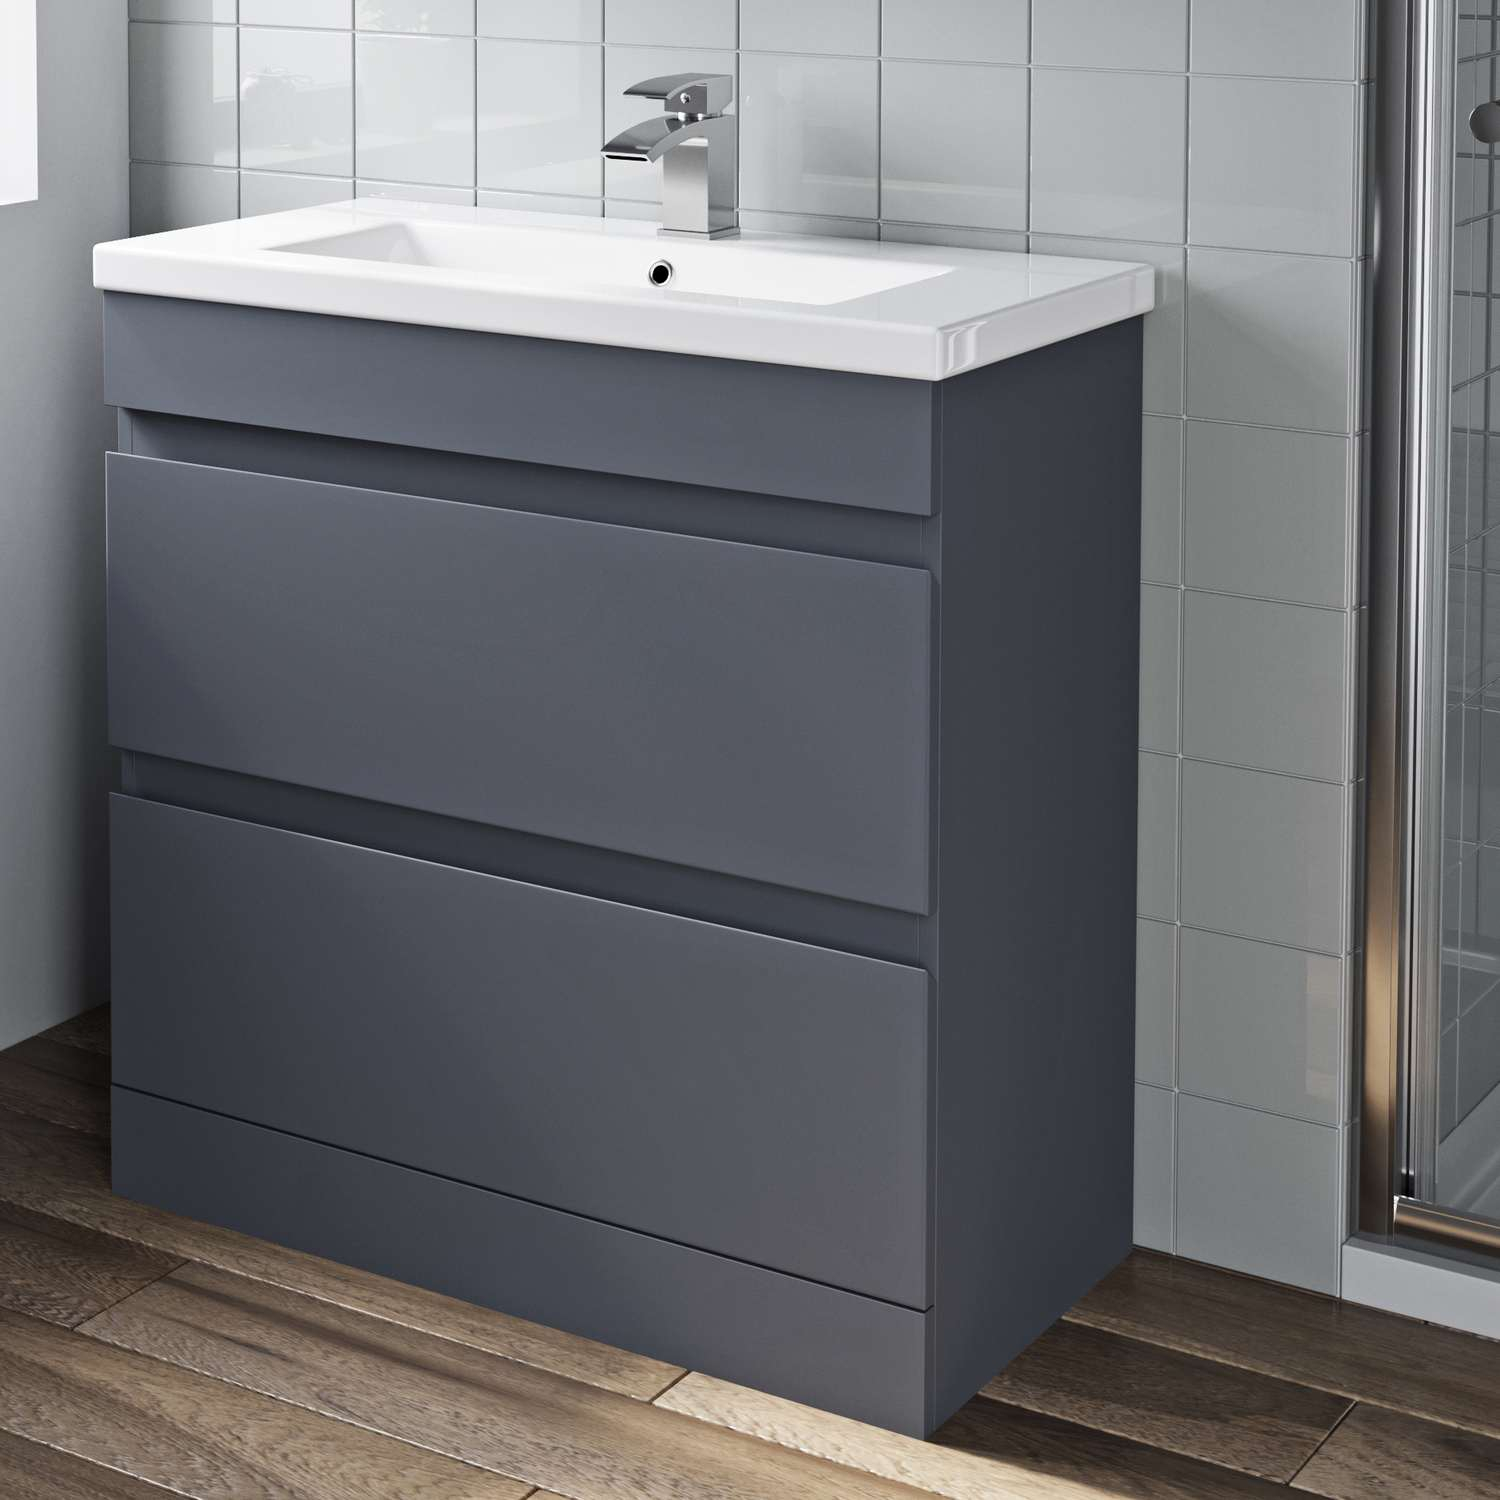 Details About 800mm Bathroom Vanity Unit Basin Storage 2 Drawer Cabinet Furniture Grey Gloss with regard to sizing 1500 X 1500